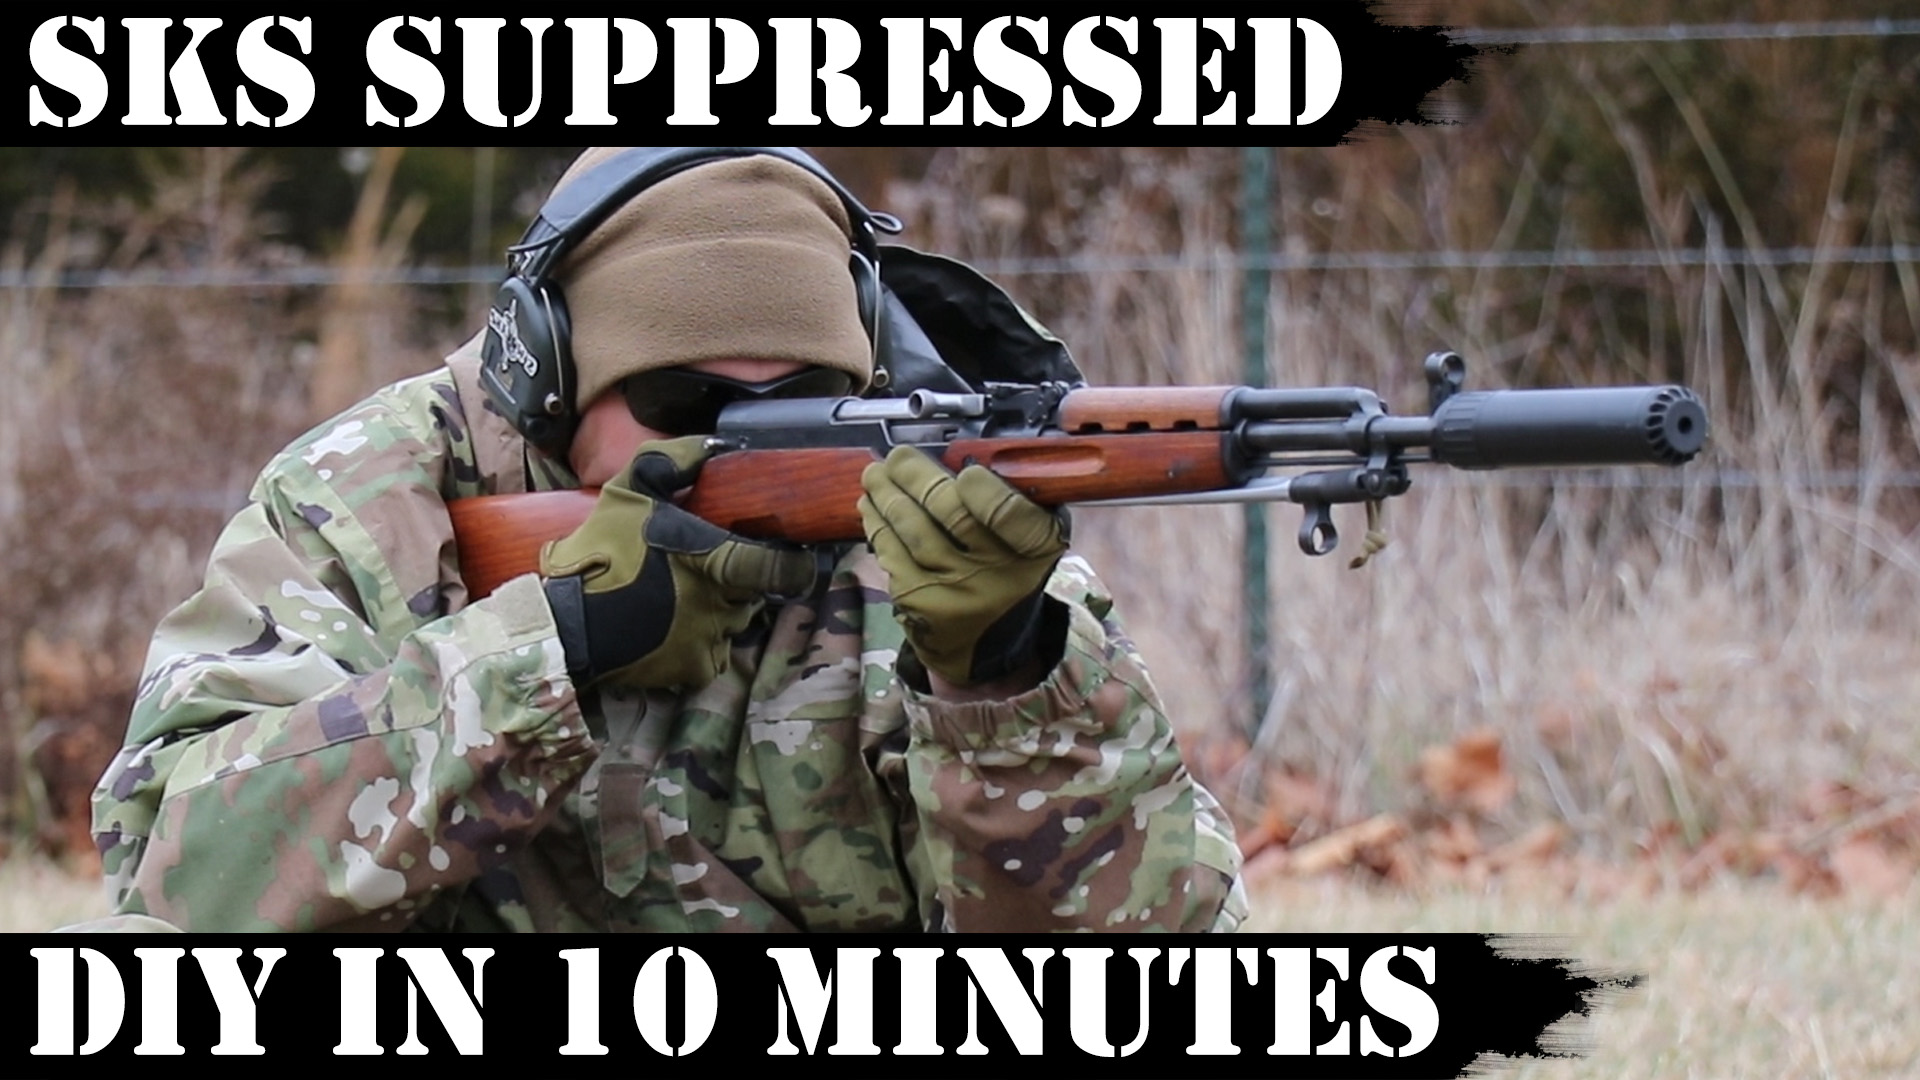 SKS Suppressed – Do it yourself in 10 minutes!